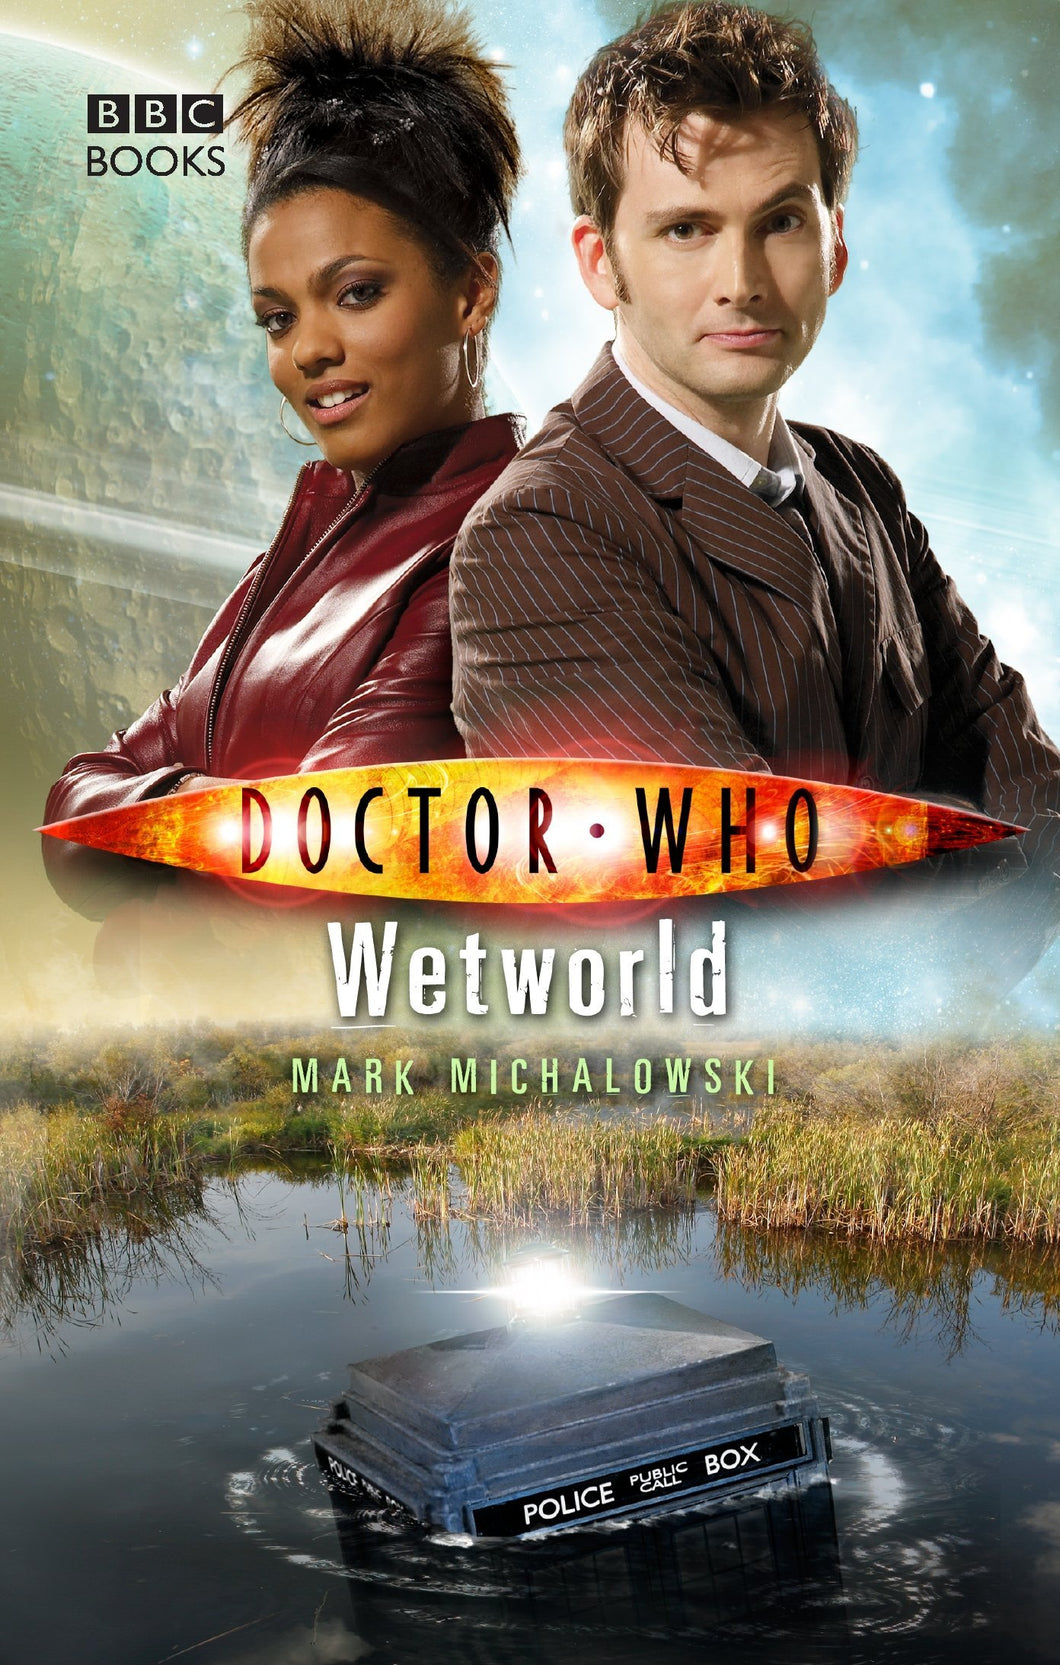 DOCTOR WHO WETWORLD - ONLINE SCHOOL BOOK FAIRS 